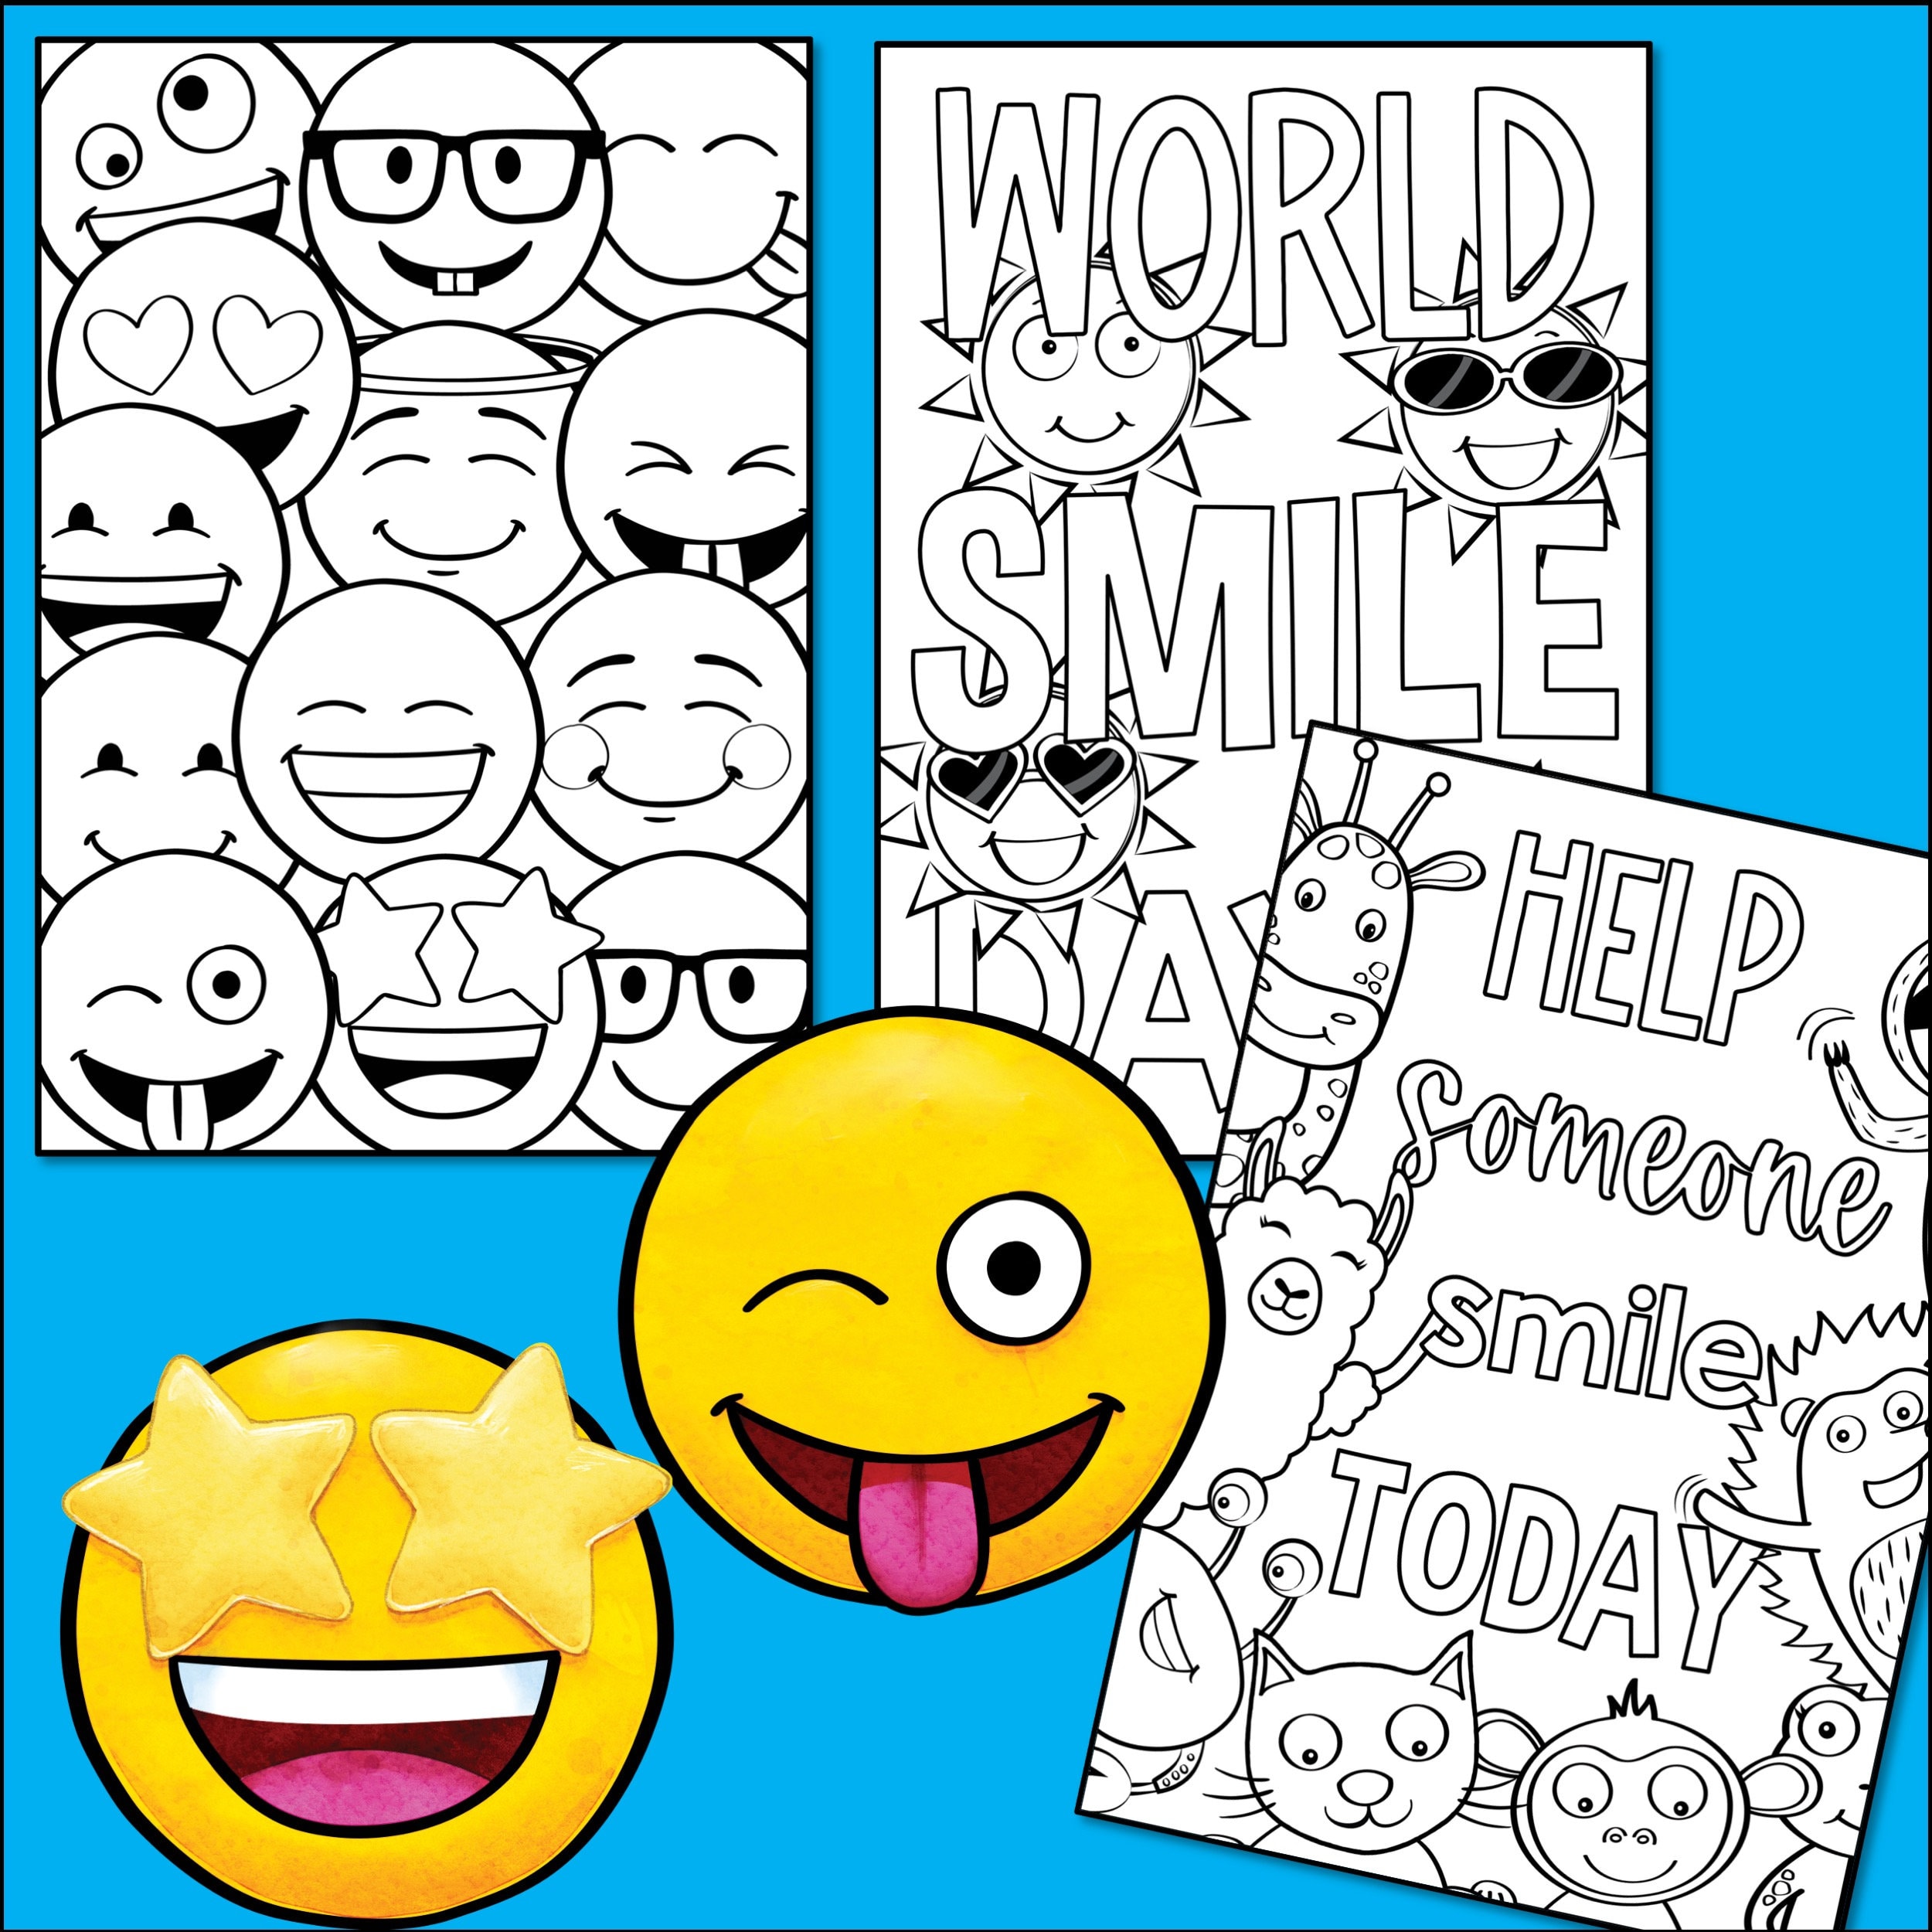 World smile day printable coloring pages instant download pack kids activity classroom fun digital coloring book pdf format